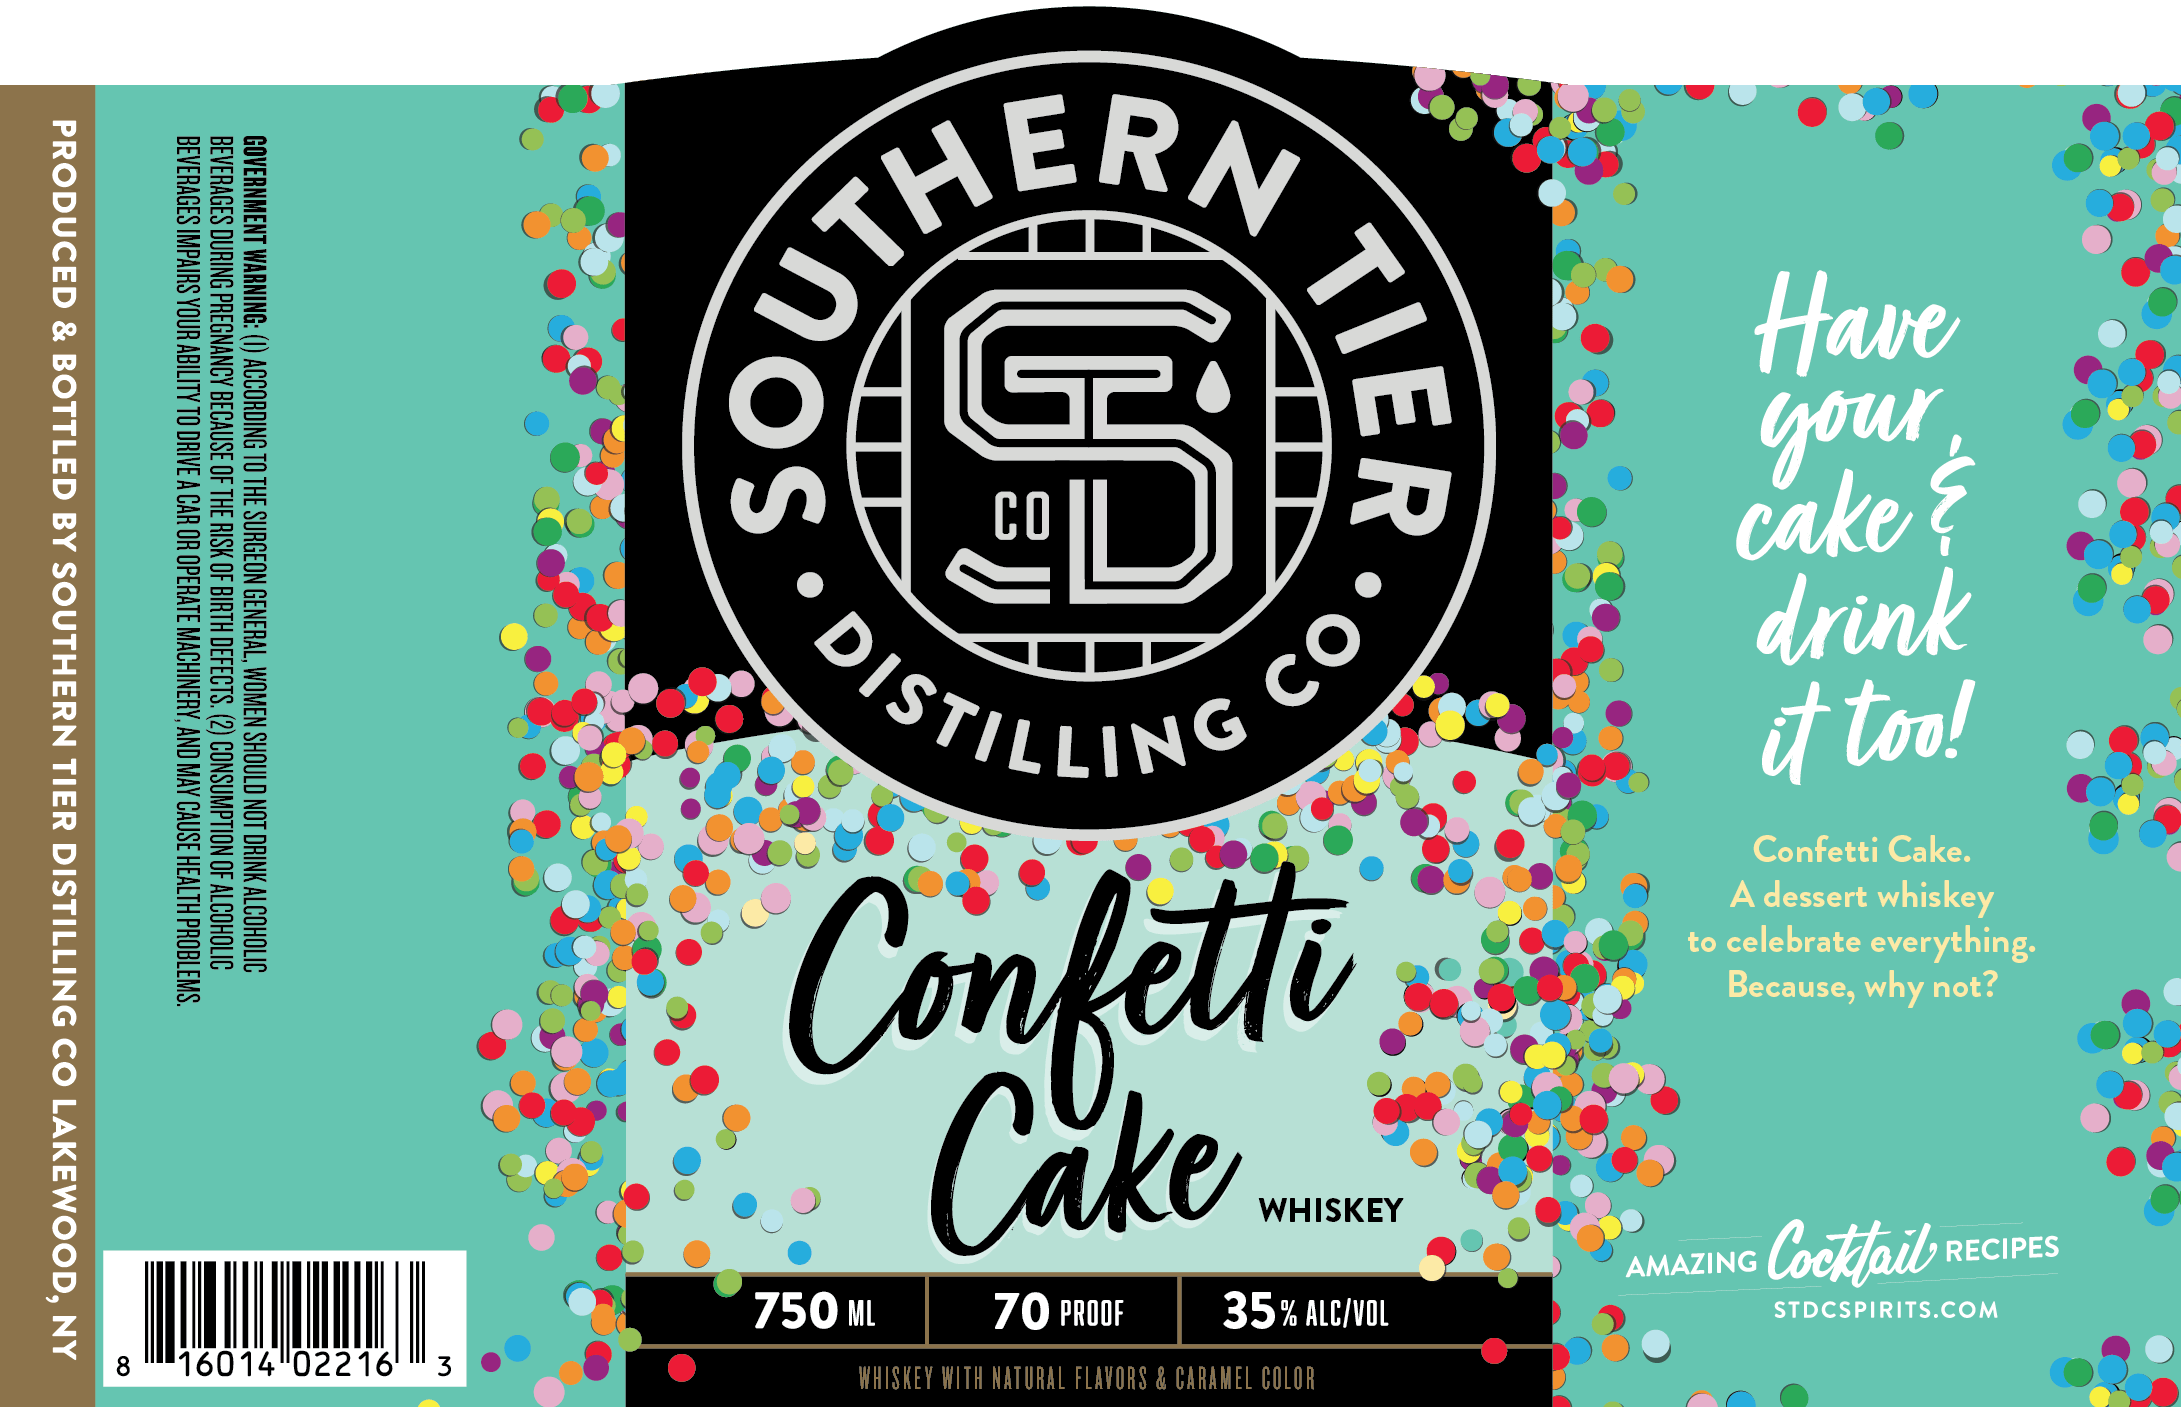 Southern Tier Confetti Cake Whiskey